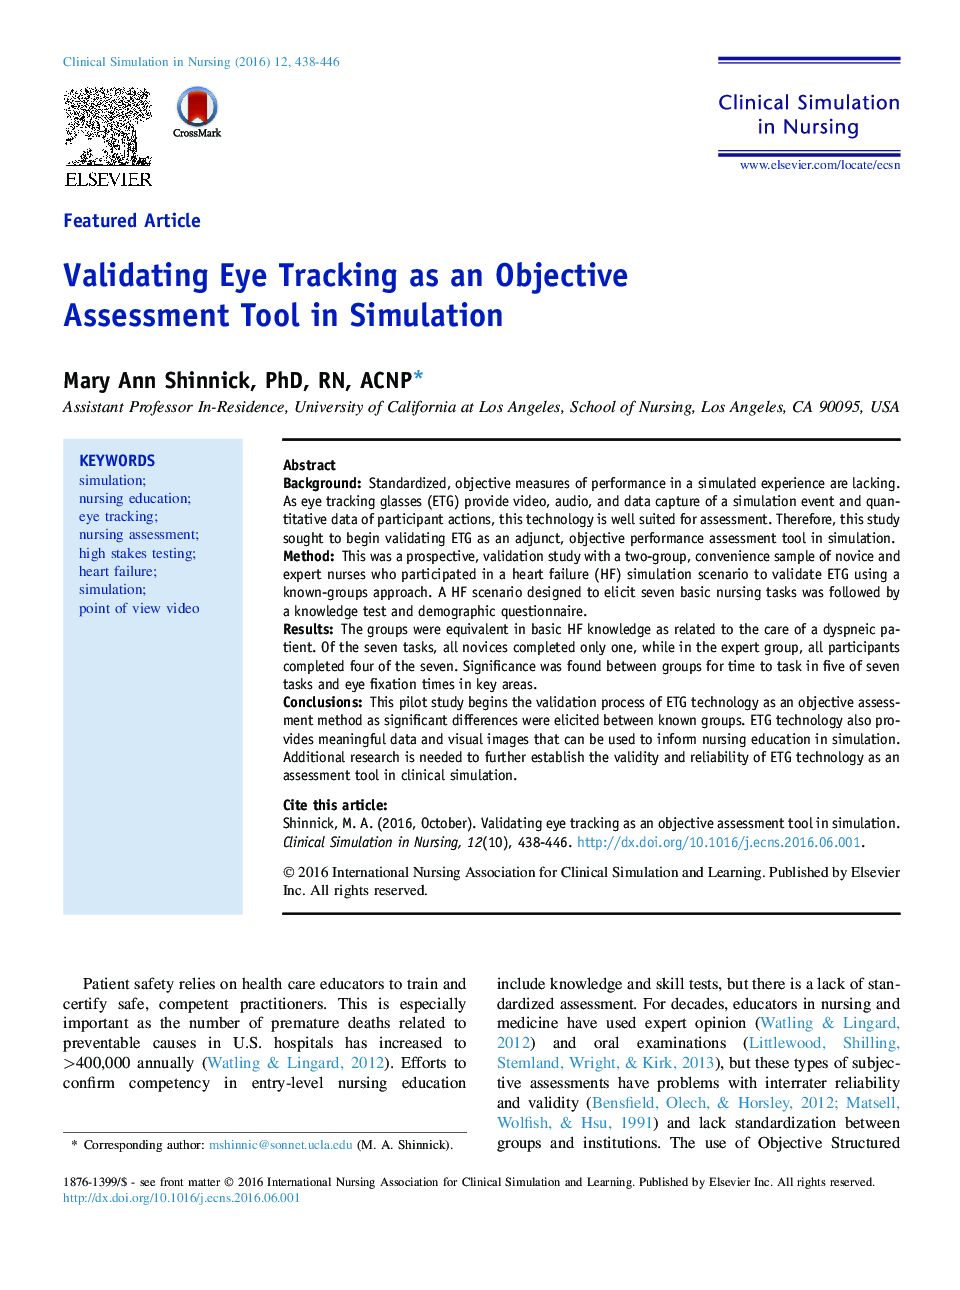 Validating Eye Tracking as an Objective Assessment Tool in Simulation